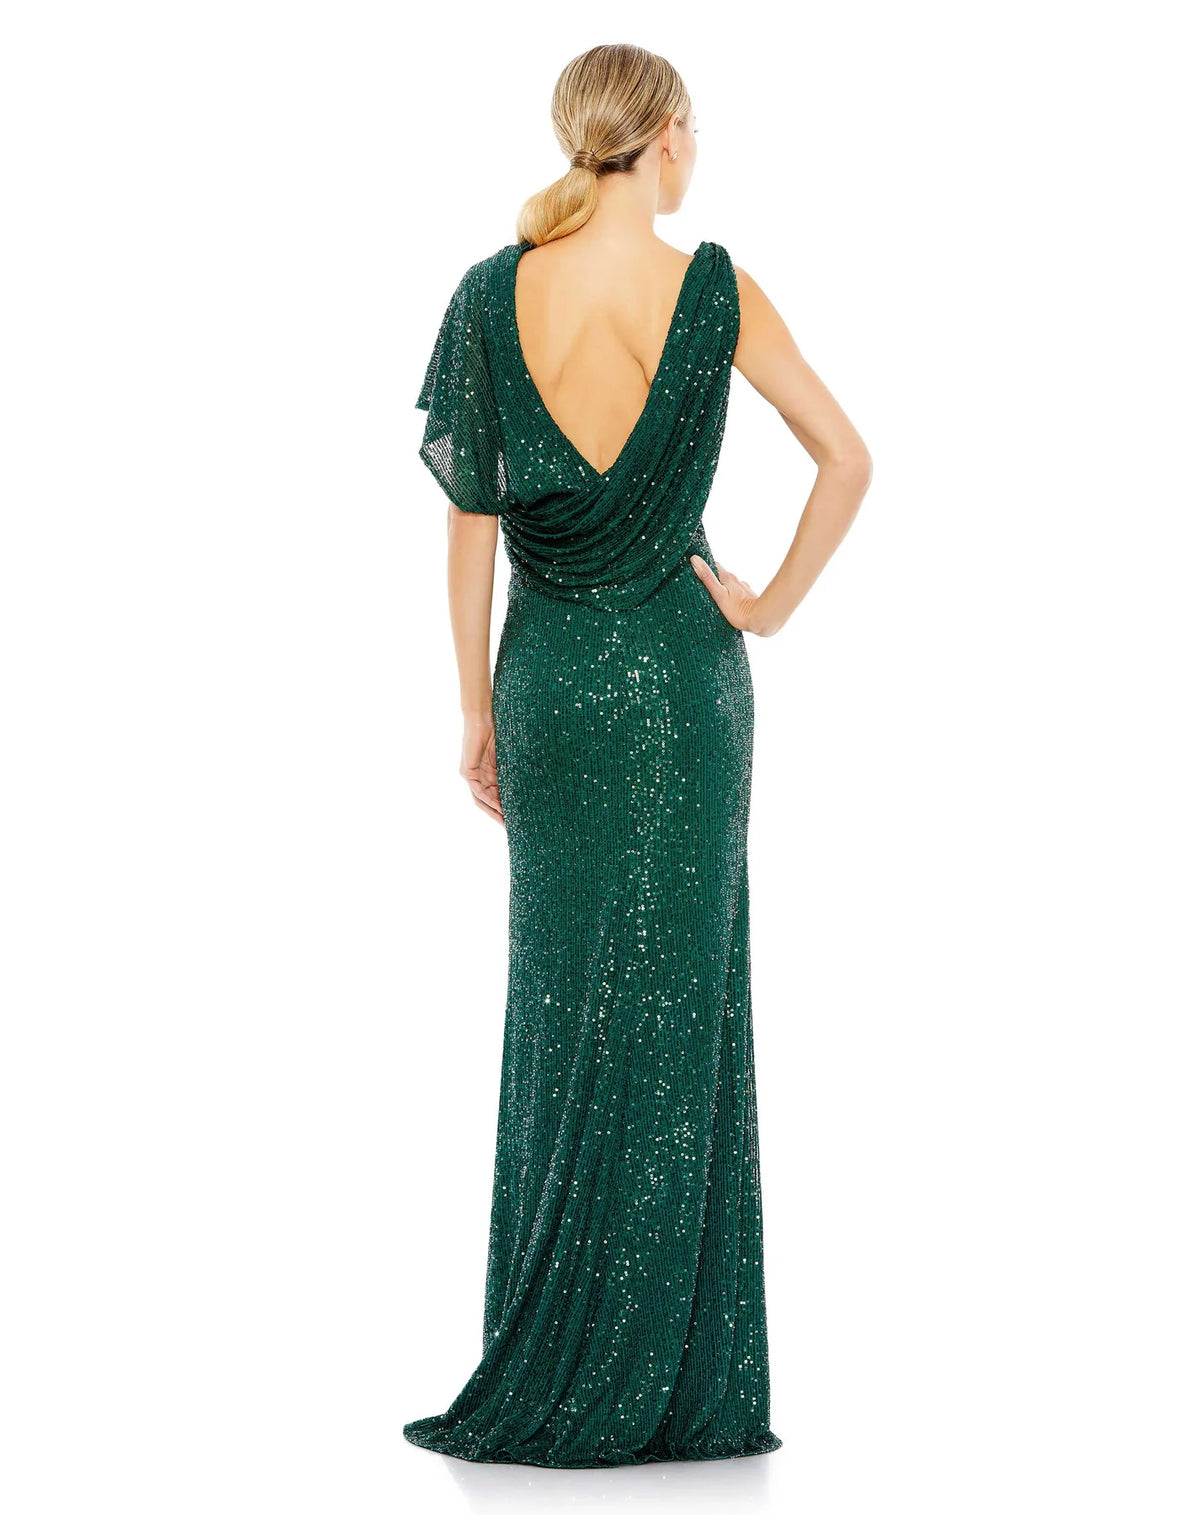 This elegant and sophisticated emerald green sequin, short-sleeved, long column evening dress is crafted with a beautiful asymmetric design over one shoulder. With a gorgeous plunging chest, banding at the waist to cinch you in at all the right places and one sexy thigh high split to give this gown a show-stopping sexy edge. This is the perfect gown for special occasions, as a wedding guest and formal events back view